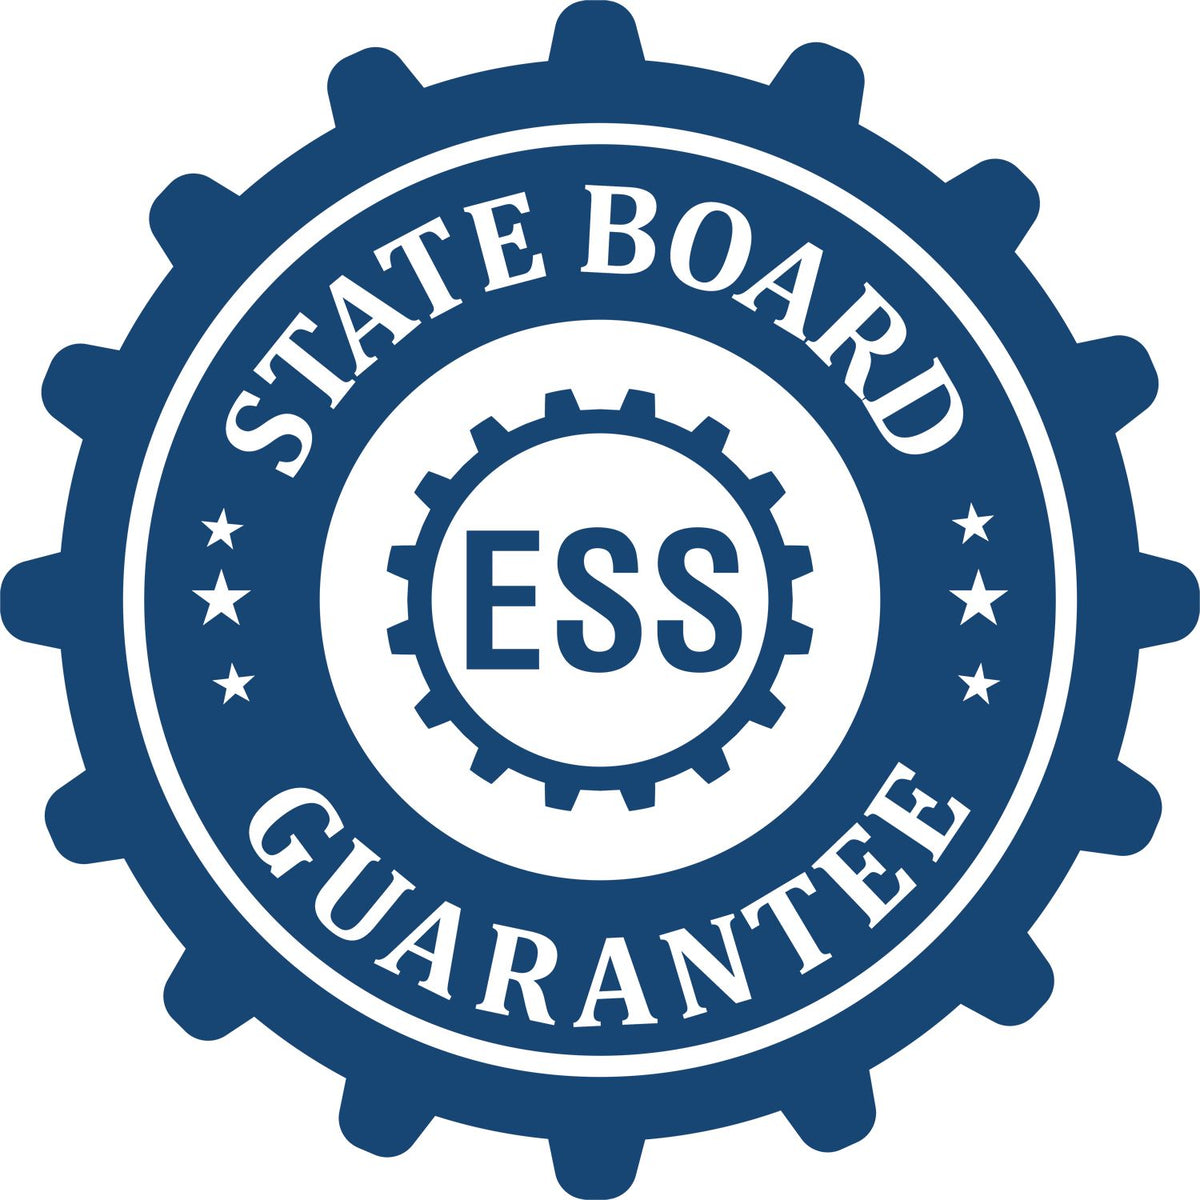 An emblem in a gear shape illustrating a state board guarantee for the State of Kentucky Extended Long Reach Engineer Seal product.